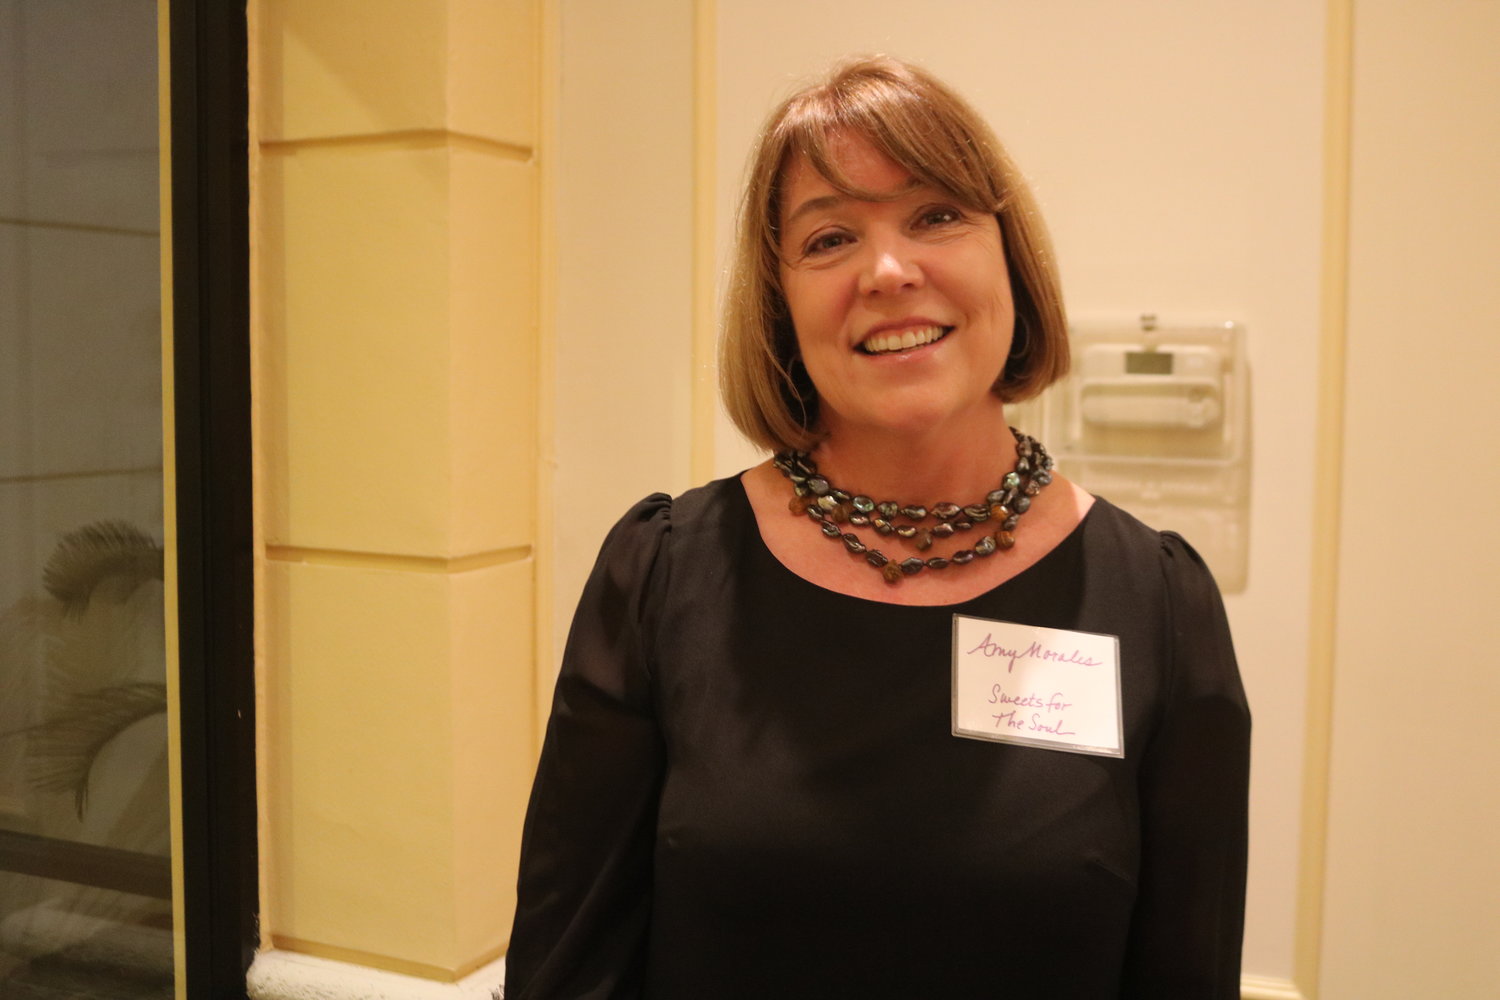 2.	Amy Morales attended the WFA as a new member and introduced the ladies of hospitality to her upcoming business.